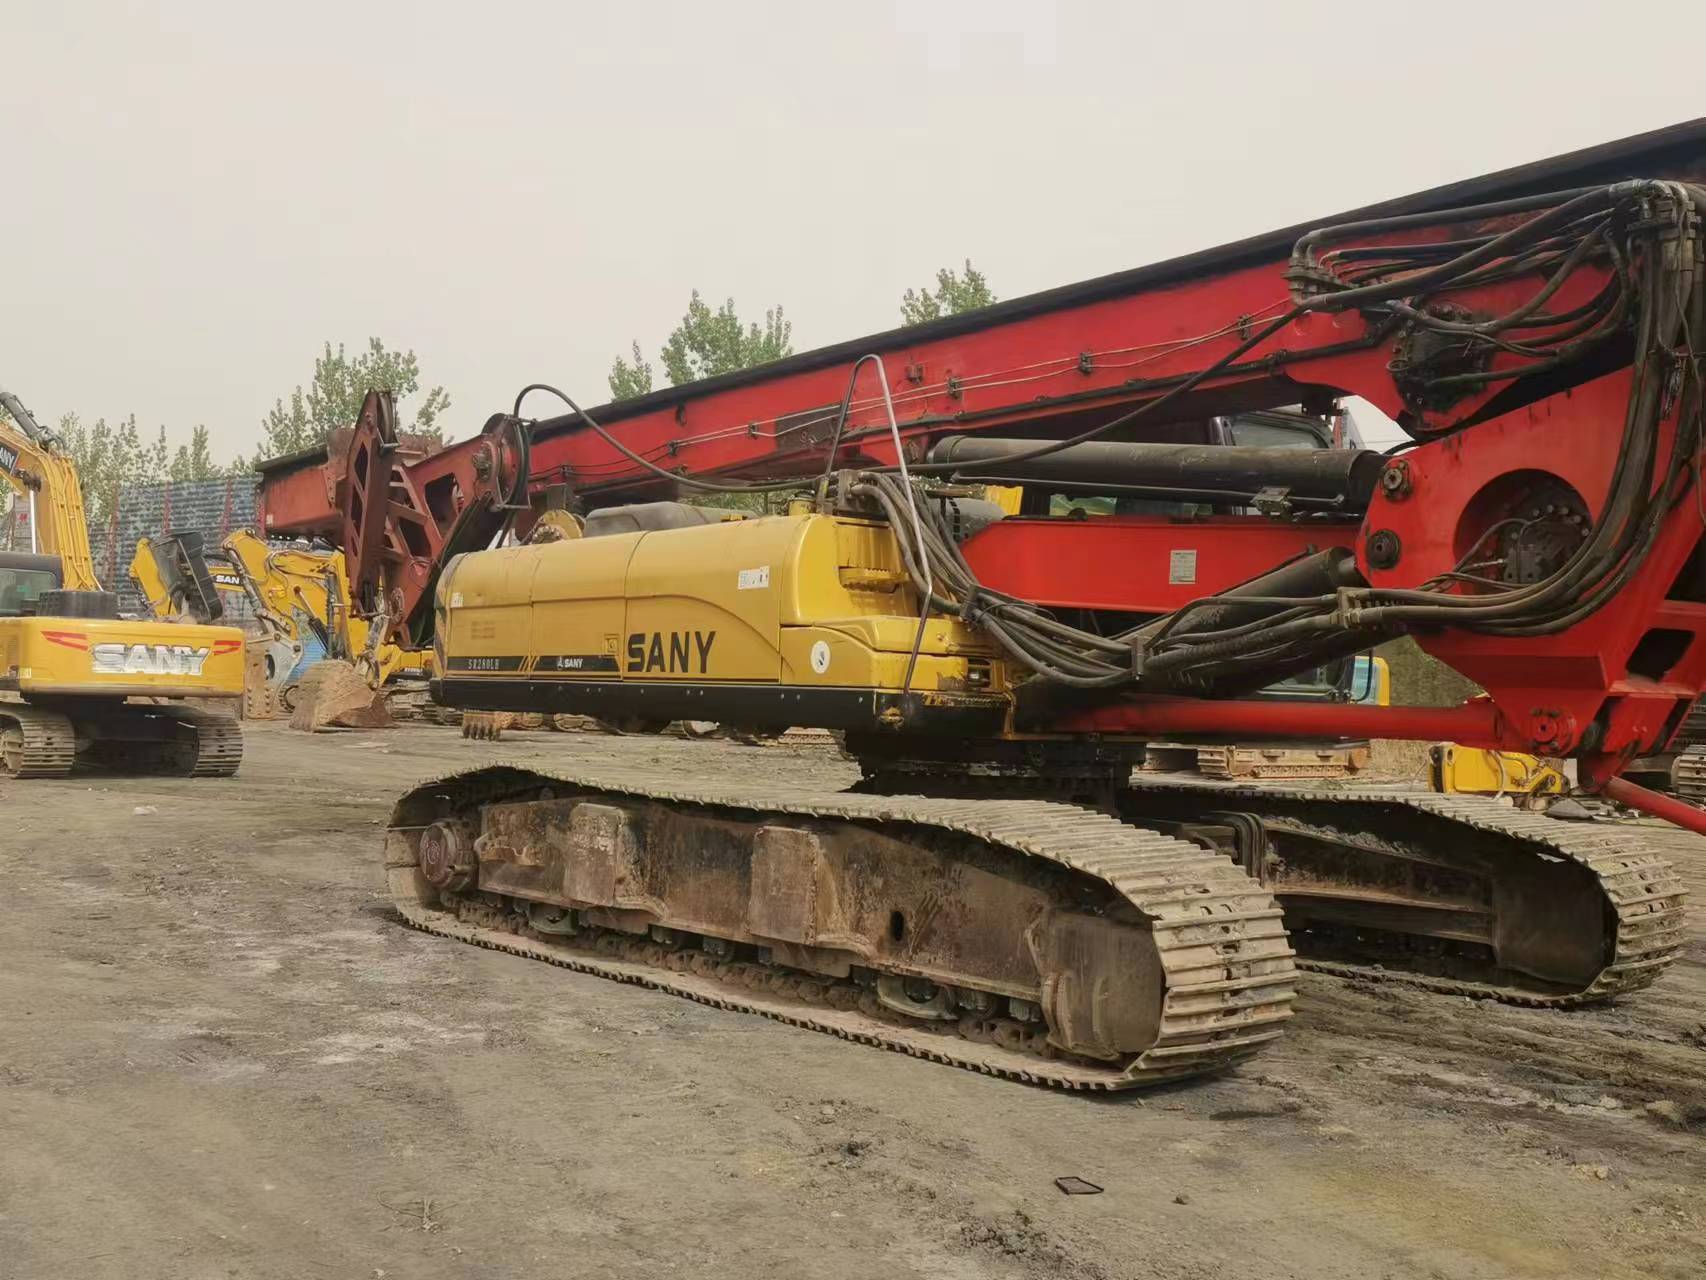 Used SANY SR280 China Pile Driver Price Mobile Portable Rotary Drilling Rig for various large-scale projects 8